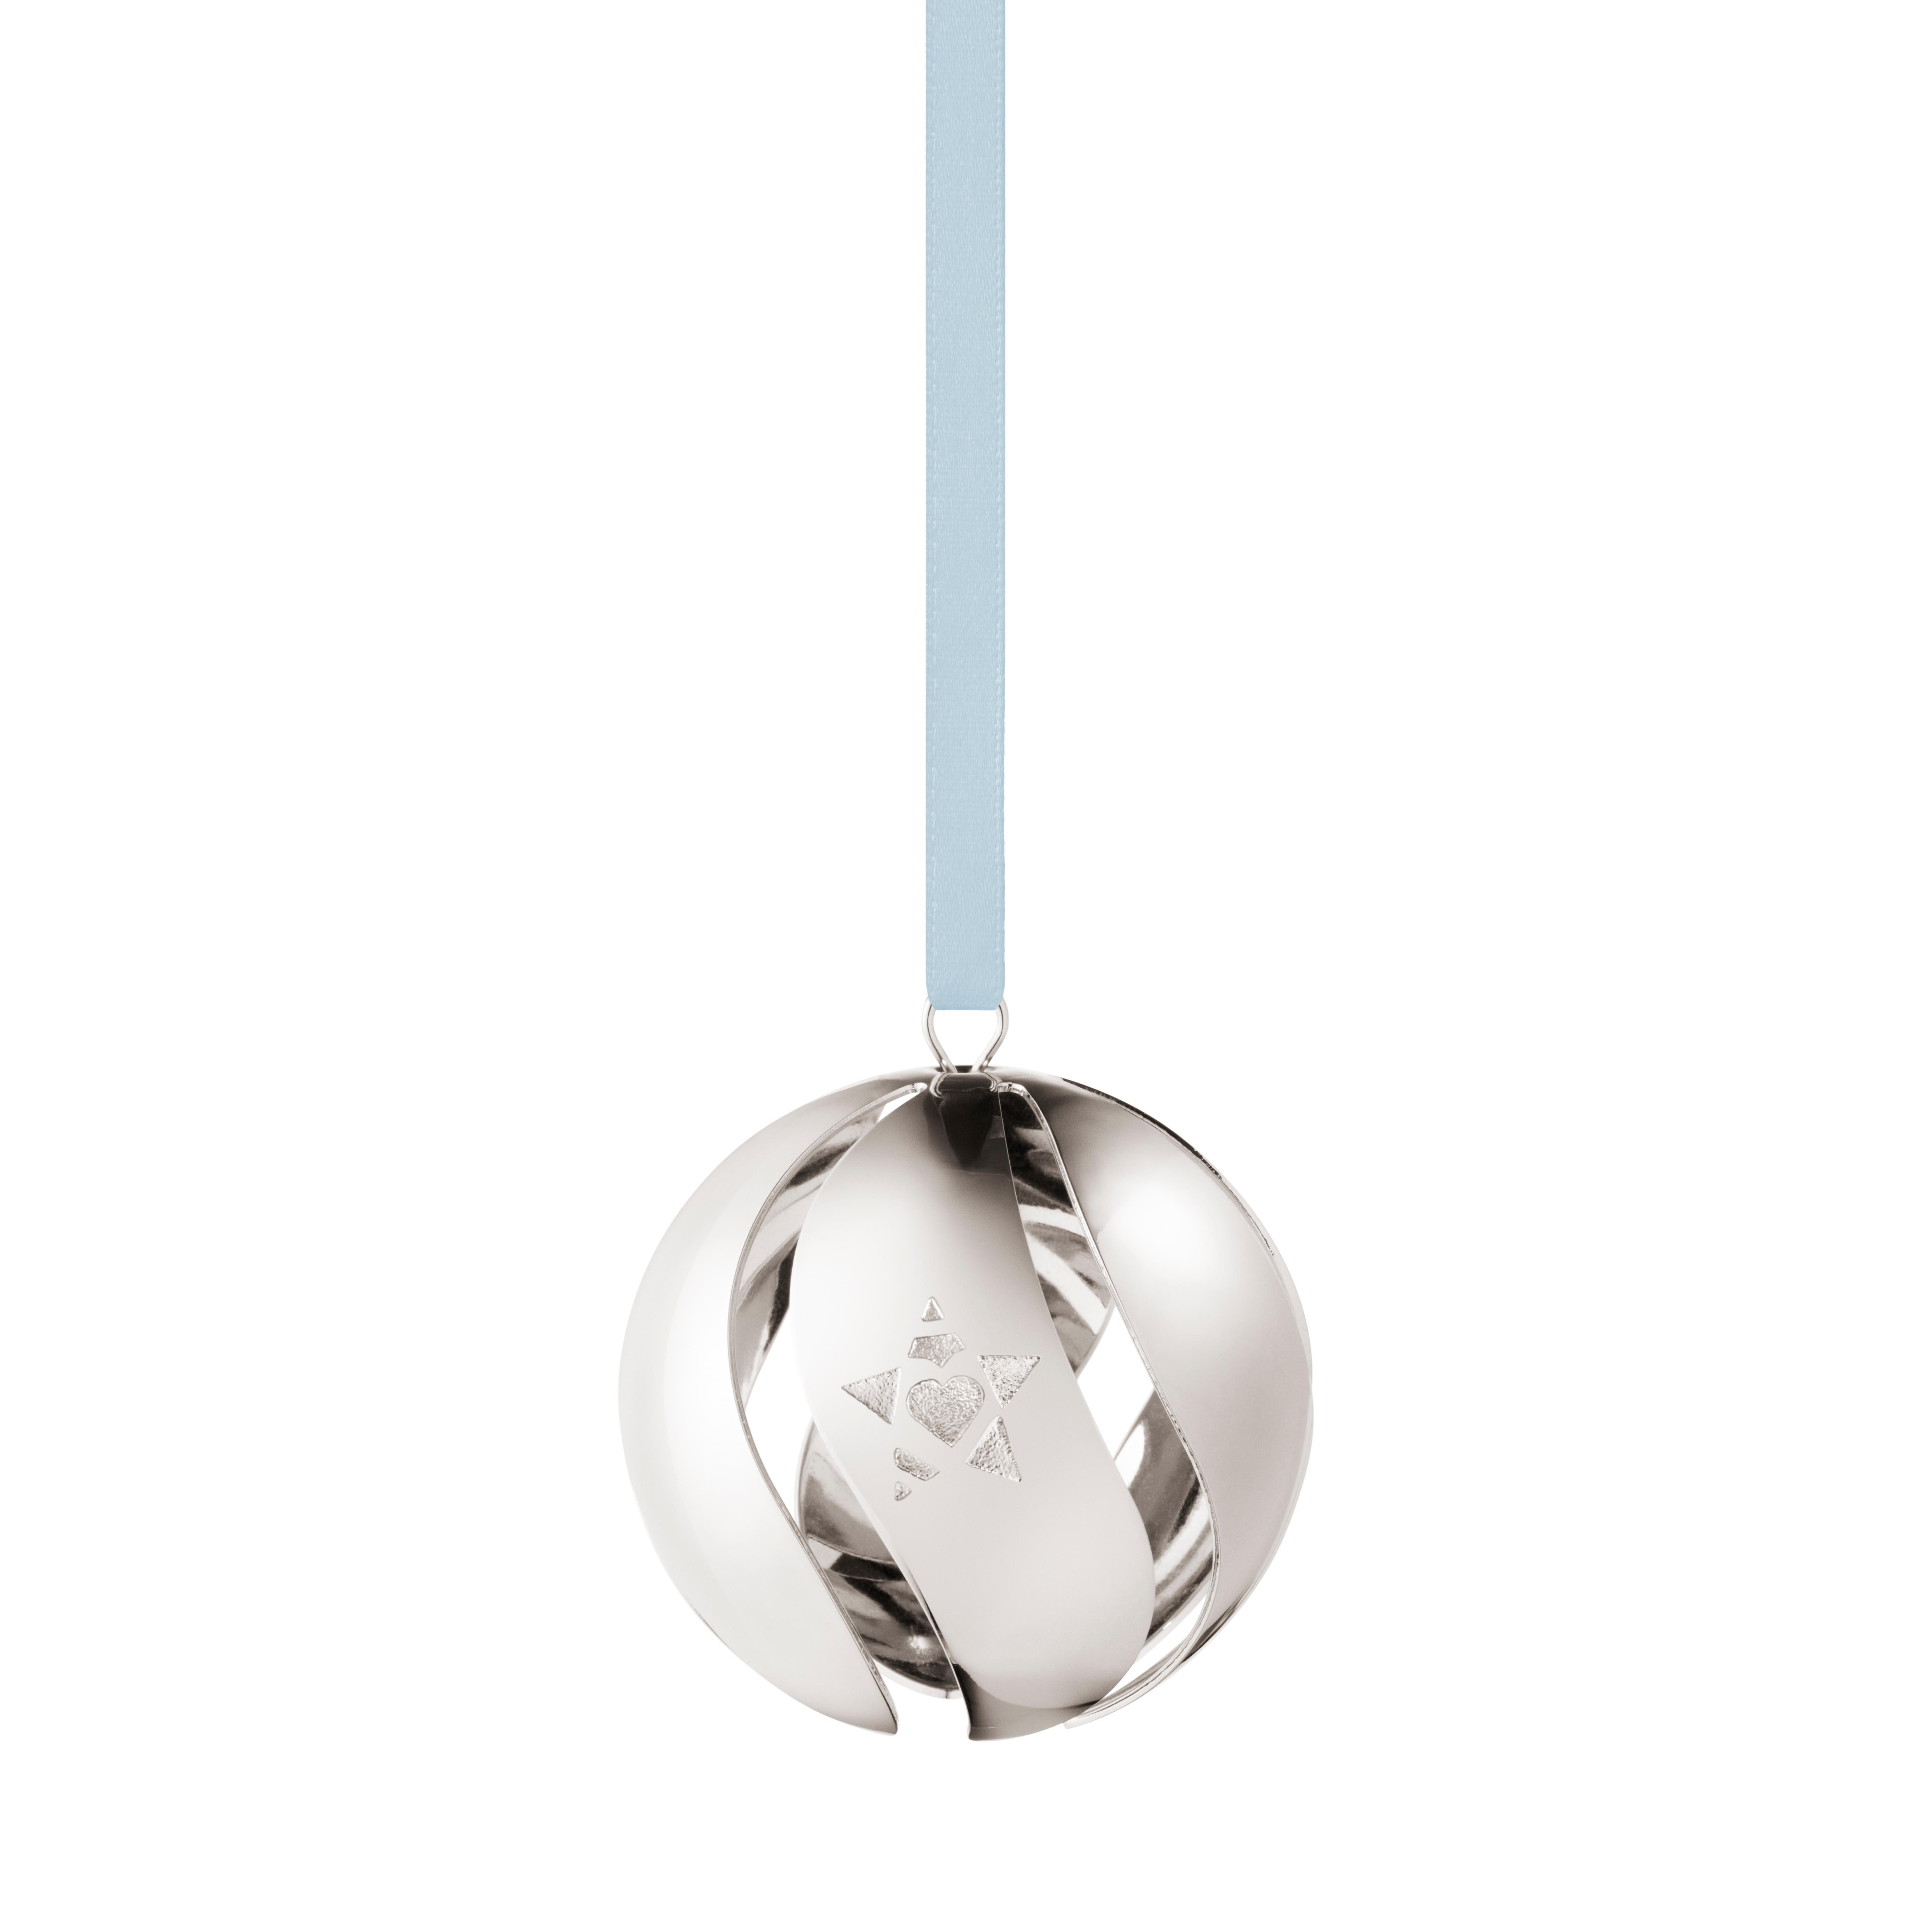 Bringing an extra dimension to the traditional Christmas bauble, this beautiful contemporary decoration features swirling cut-outs in the matte surface to reveal a shiny silver coloured interior that reflects the light as the bauble turns on its